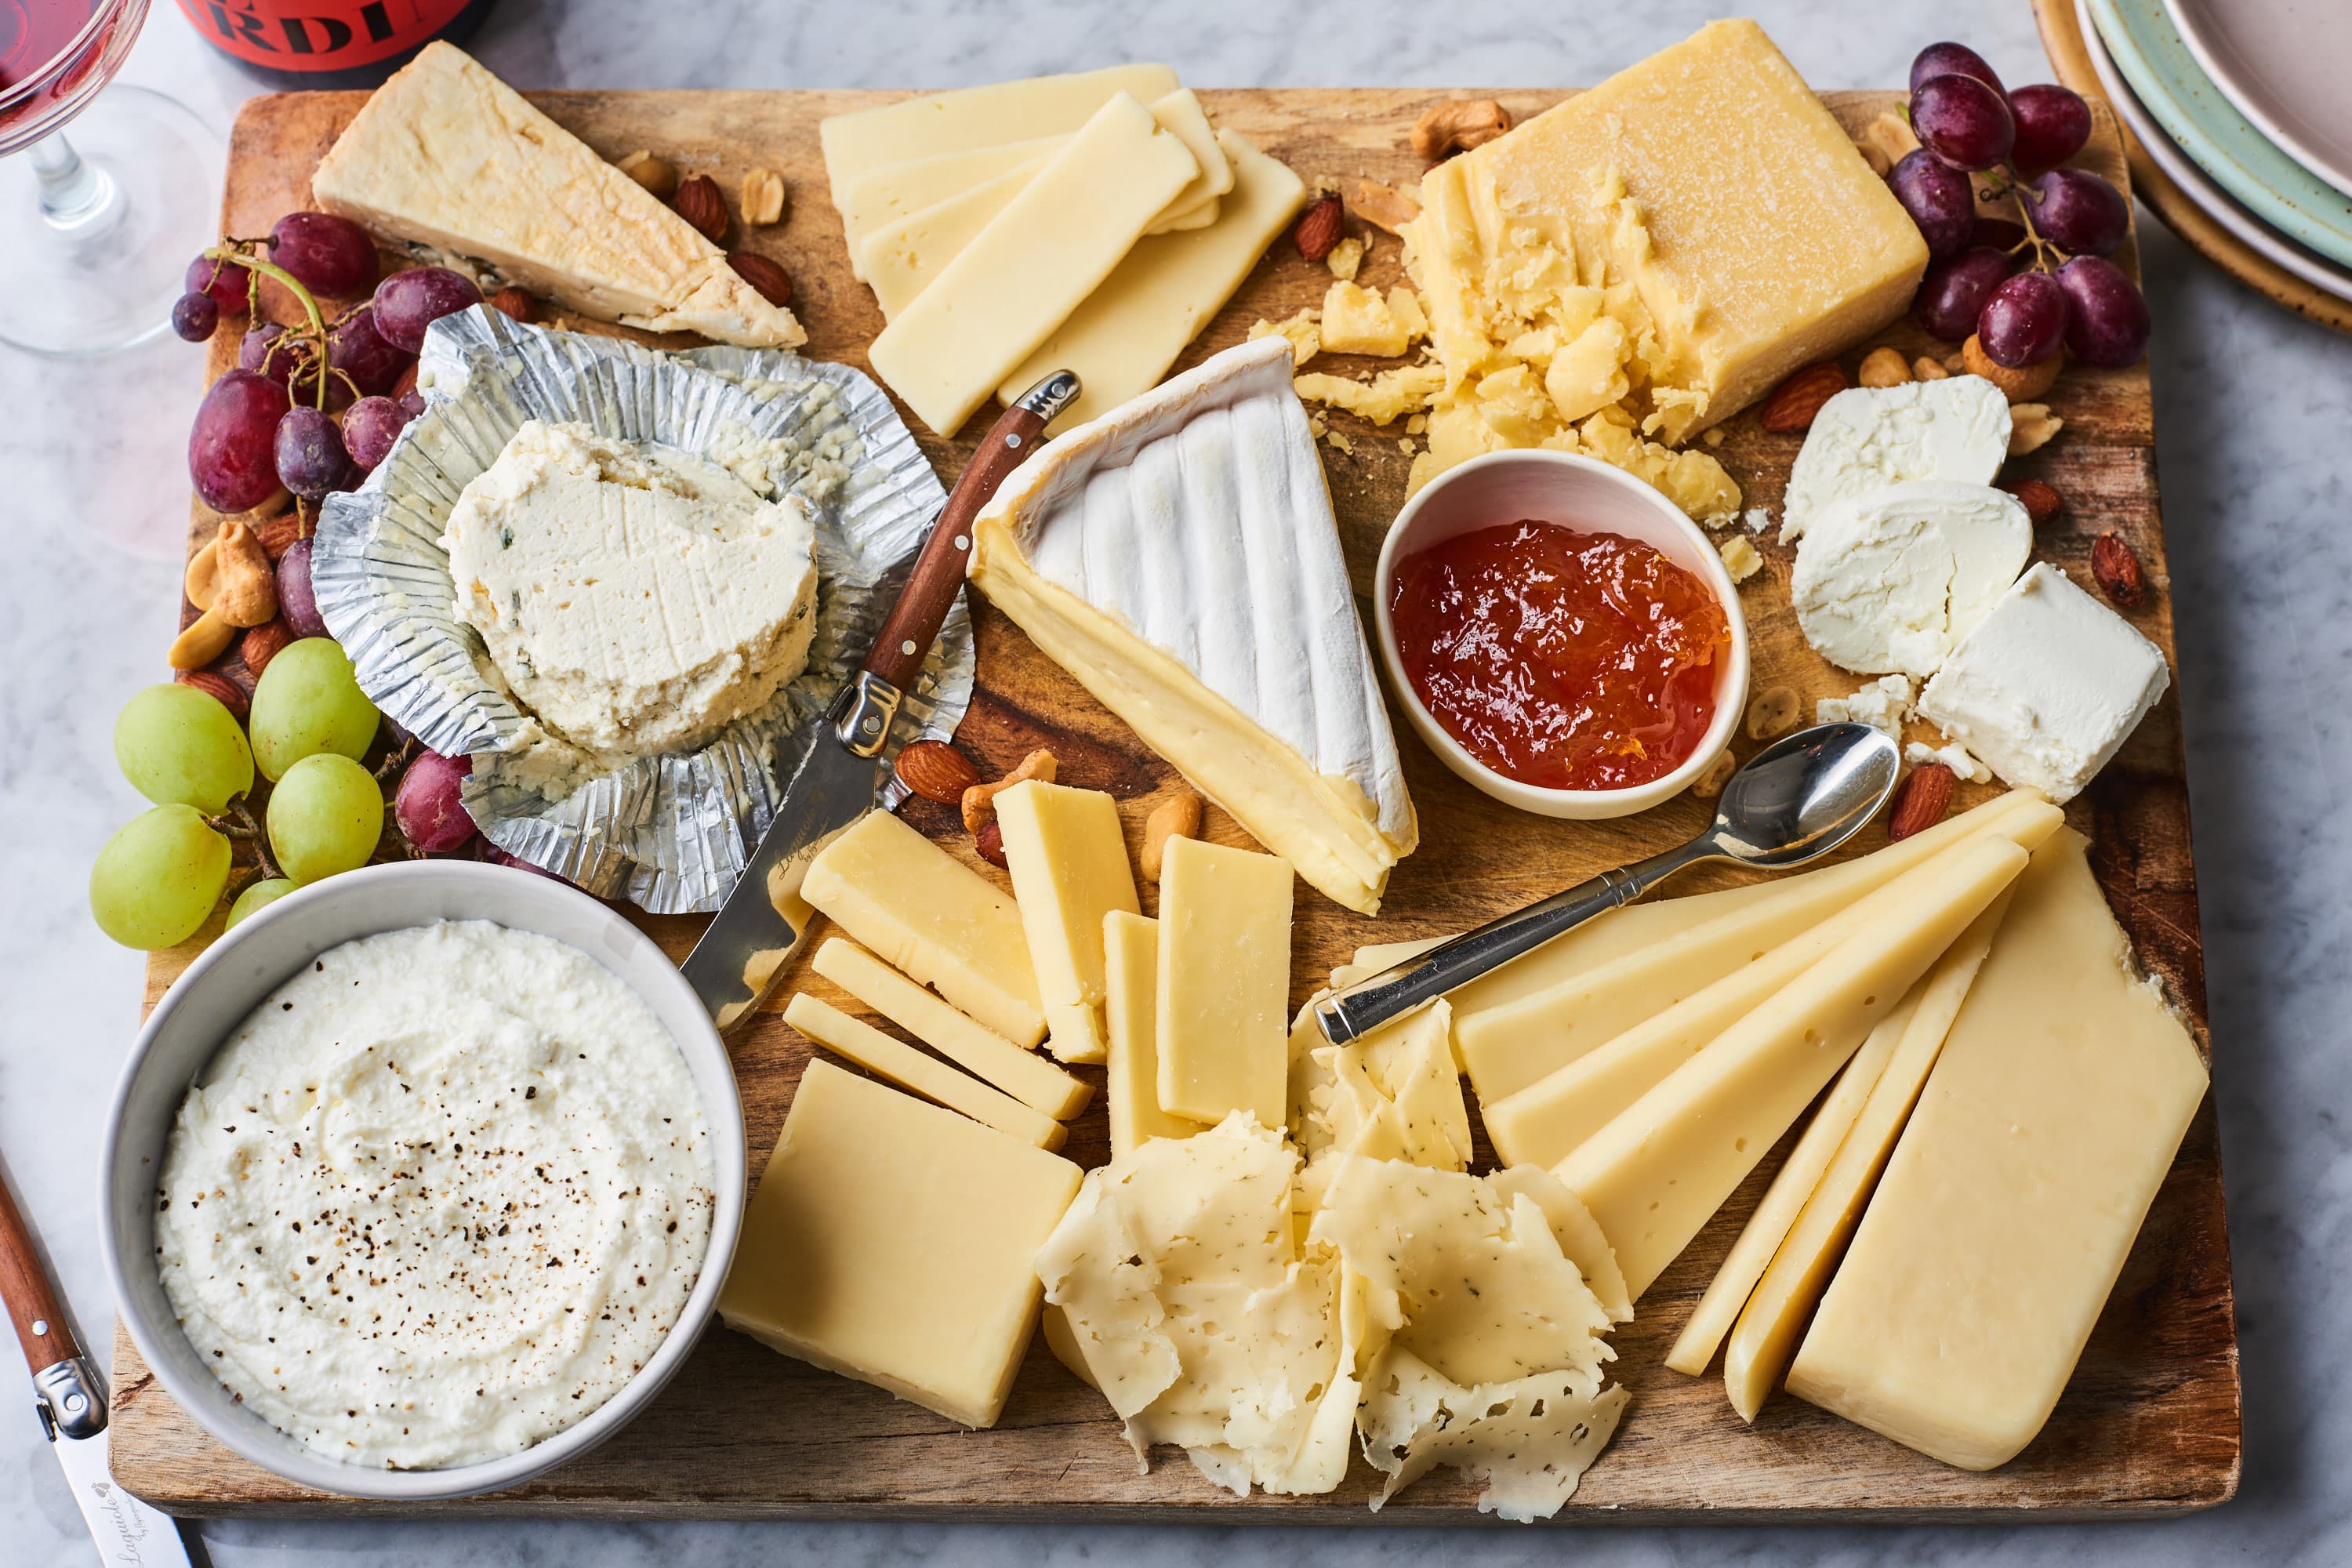 https://cdn.apartmenttherapy.info/image/upload/v1572643399/k/Photo/Lifestyle/2019-11-15-Great-Grocery-Store-Cheeses-for-Any-Cheese-Board/15-Great-Grocery-Store-Cheeses-for-Any-Cheese-Board_057.jpg